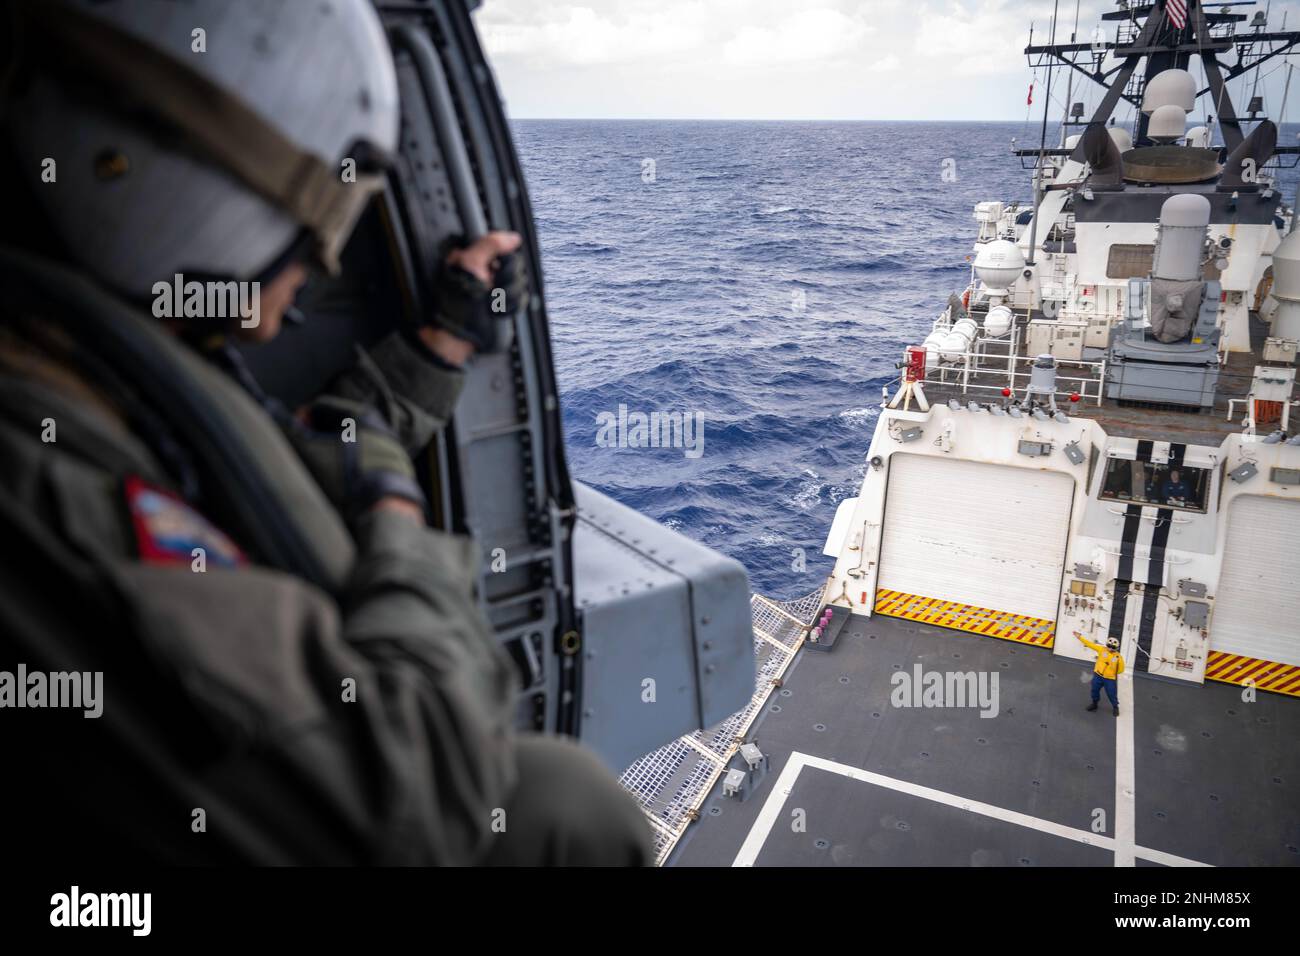 PACIFIC OCEAN (July 30, 2022) U.S. Navy Petty Officer 1st Class Humberto Alba, a naval aircrewman tactical-helicopter, attached to Helicopter Maritime Strike Squadron (HSM) 37, deployed on U.S. Coast Guard Legend-class cutter USCGC Midgett (WMSL 757), looks down at a USCGC crewmember after taking off during flight operations during Rim of the Pacific (RIMPAC) 2022. Twenty-six nations, 38 ships, three submarines, more than 170 aircraft and 25,000 personnel are participating in RIMPAC from June 29 to Aug. 4 in and around the Hawaiian Islands and Southern California. The world's largest internati Stock Photo